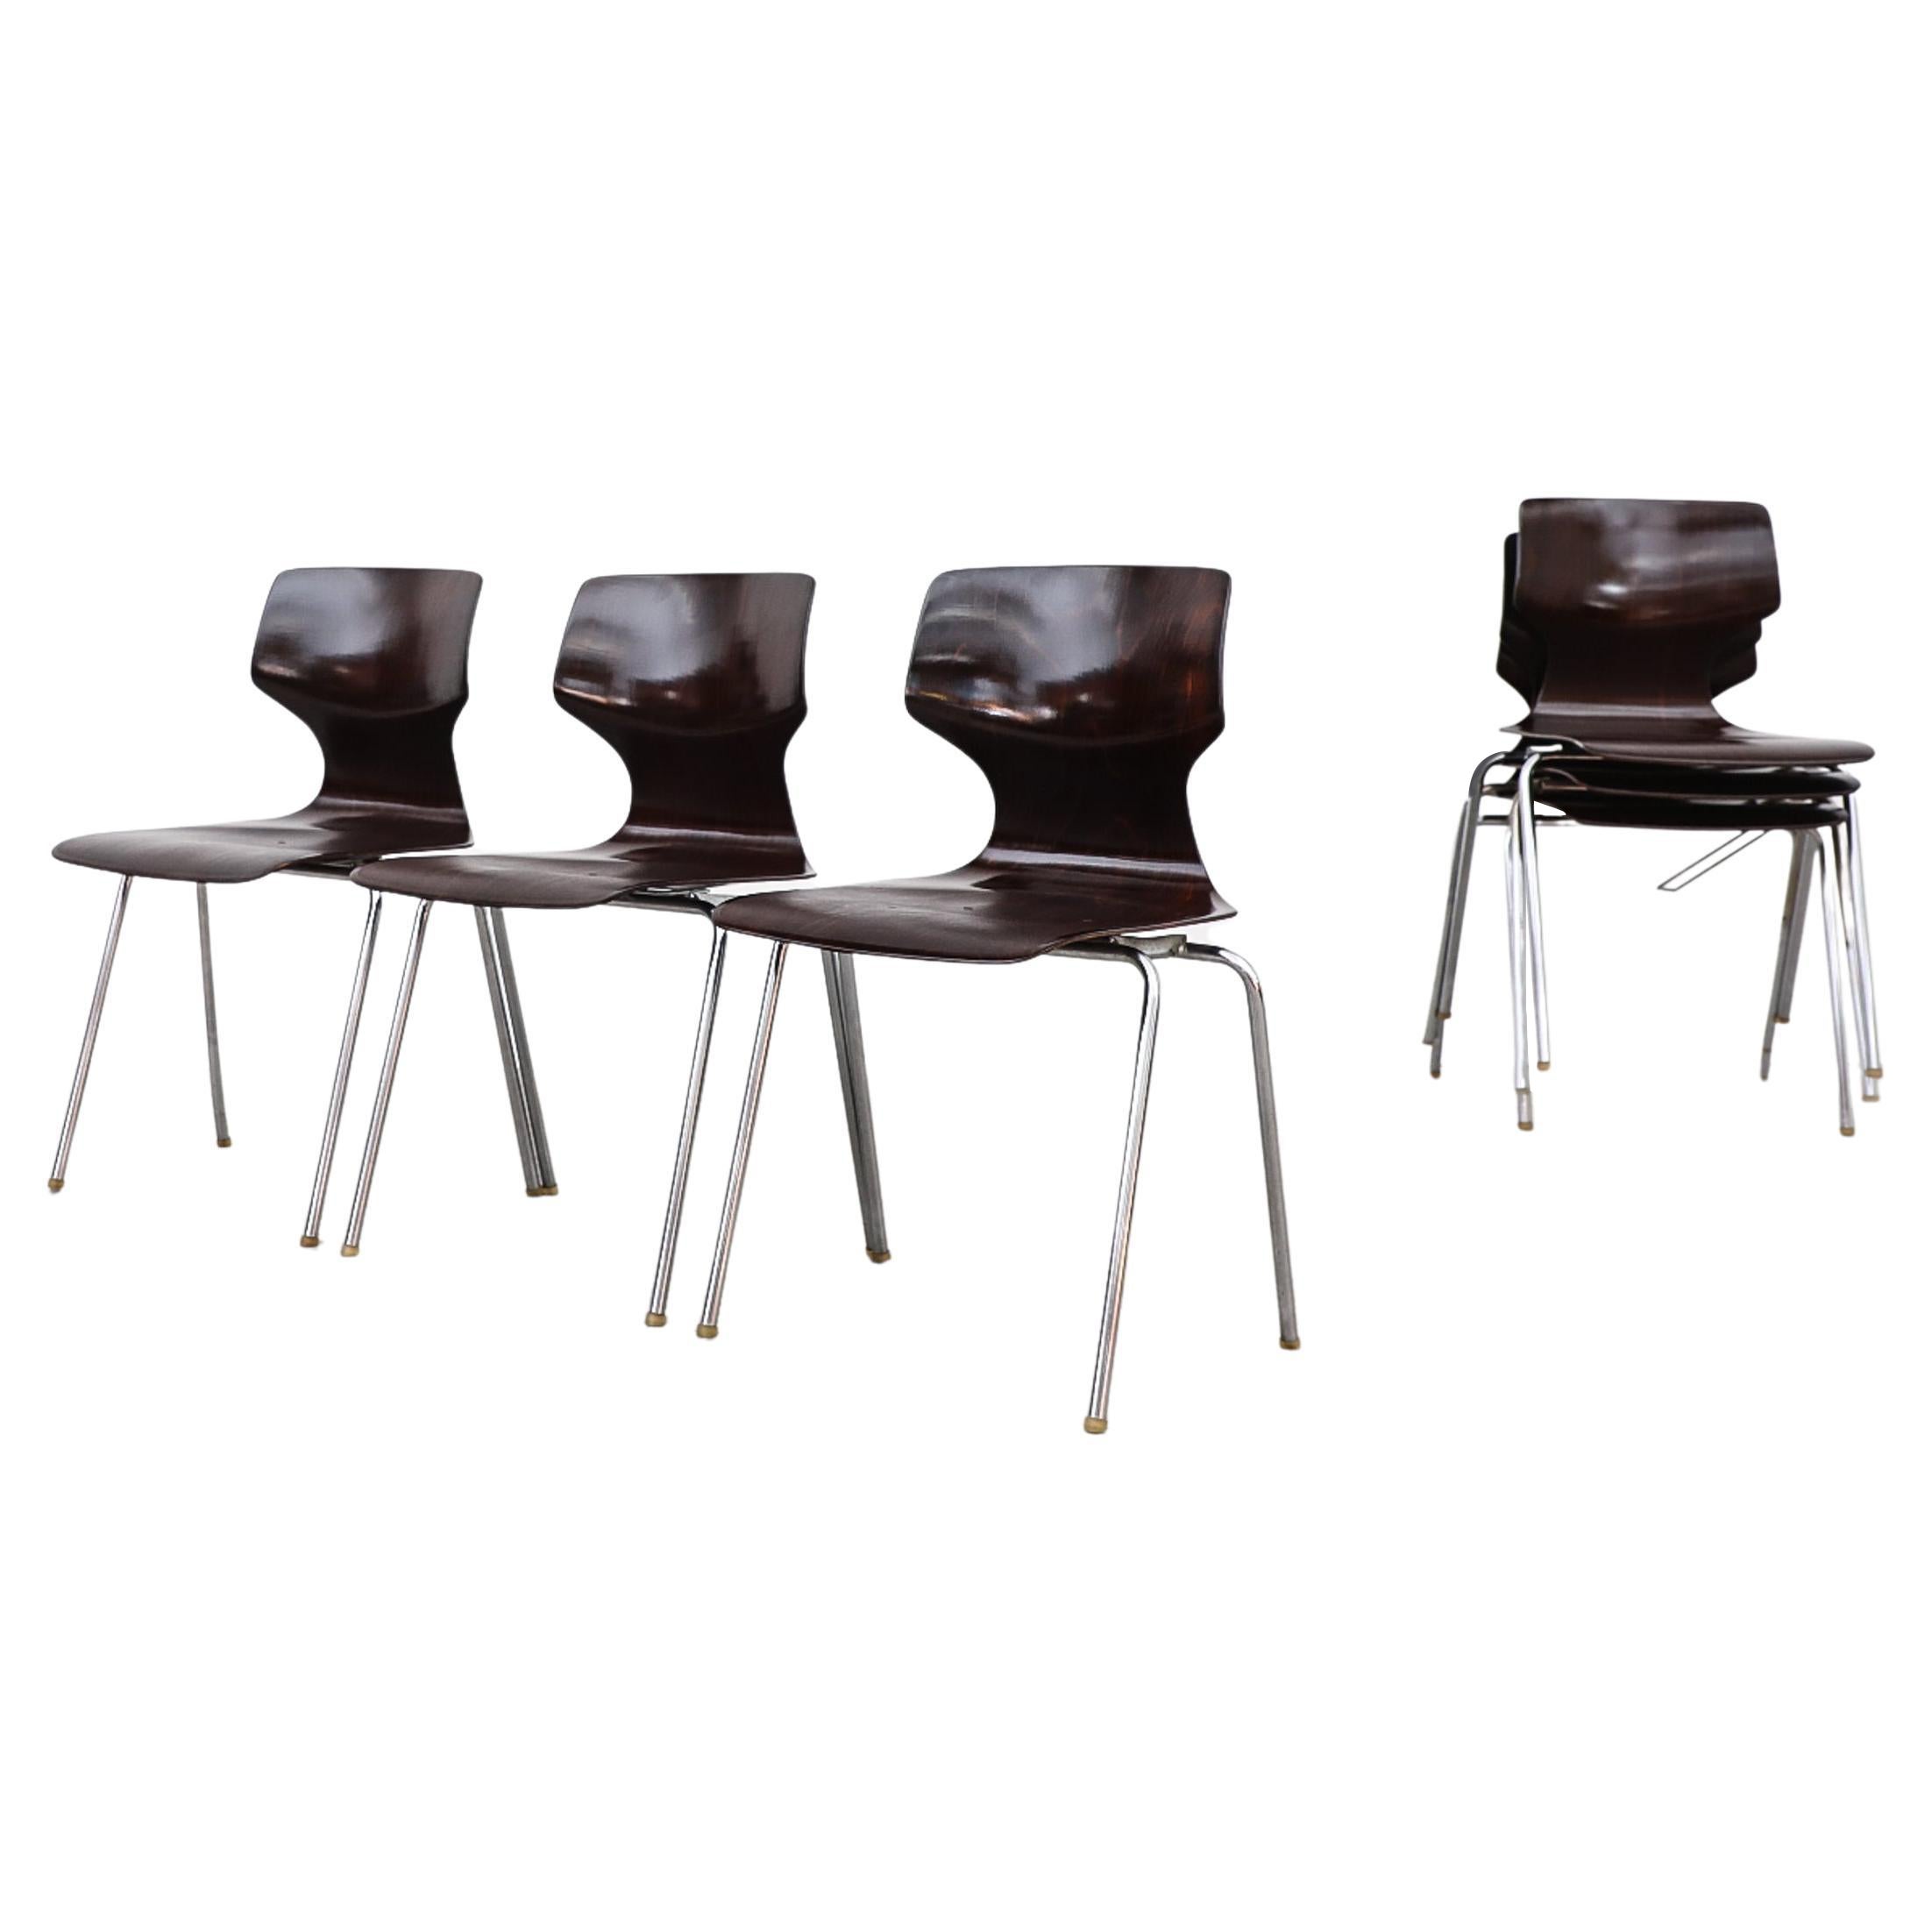 Pagholz Flötotto Dark Brown Wingback Stacking Chairs with Chrome Legs, 1970s For Sale